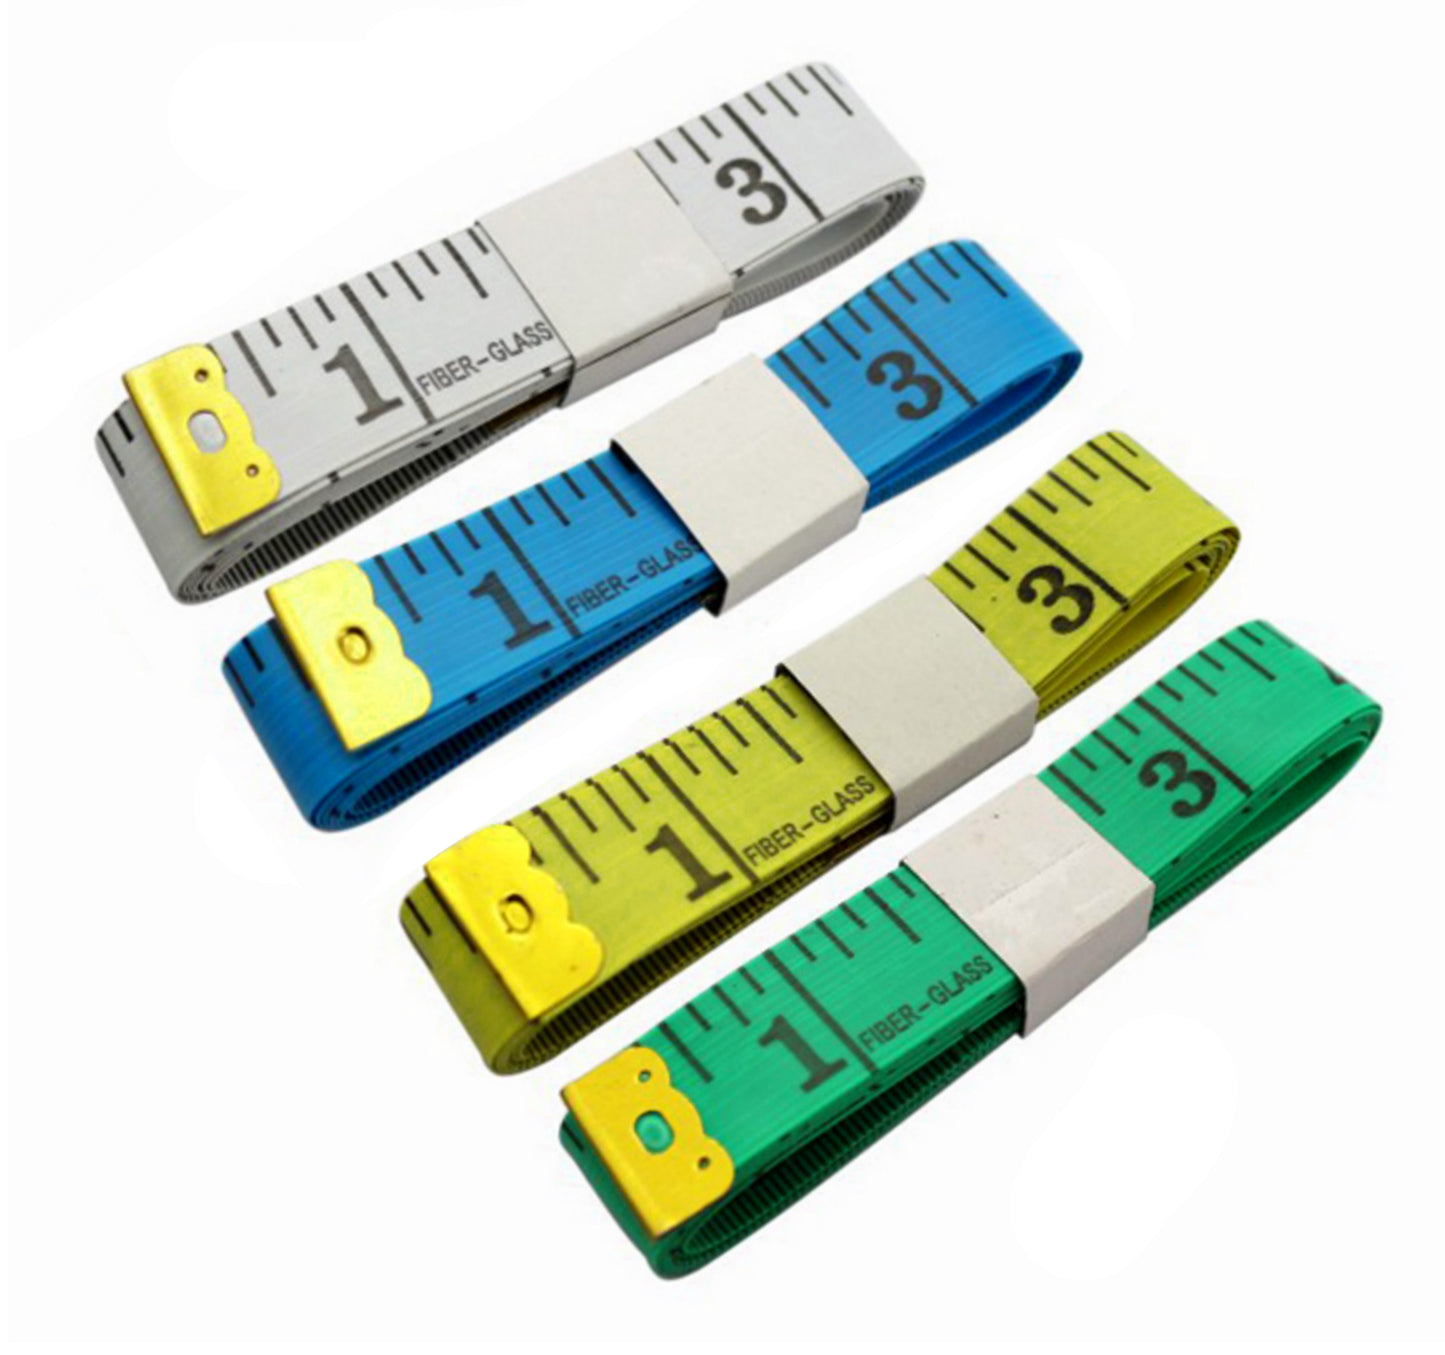 4 pcs Soft Measure Tape Double Scale, Multicolor Soft Sewing Measuring Tape for Weight Loss Body Measurements Tailor Craft